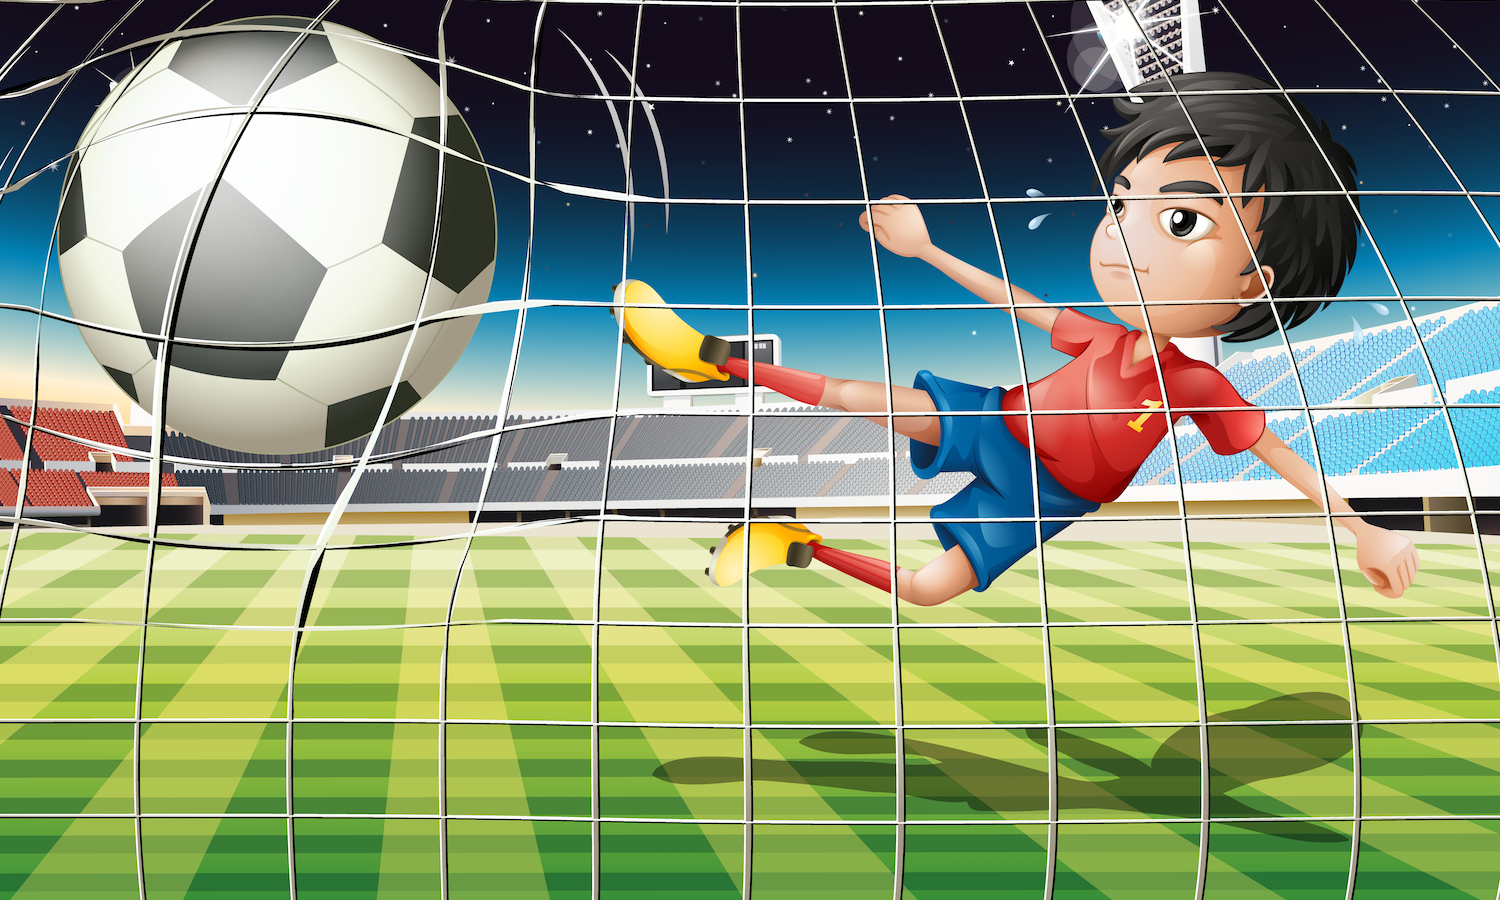 Illustration of a boy kicking the ball at the soccer field